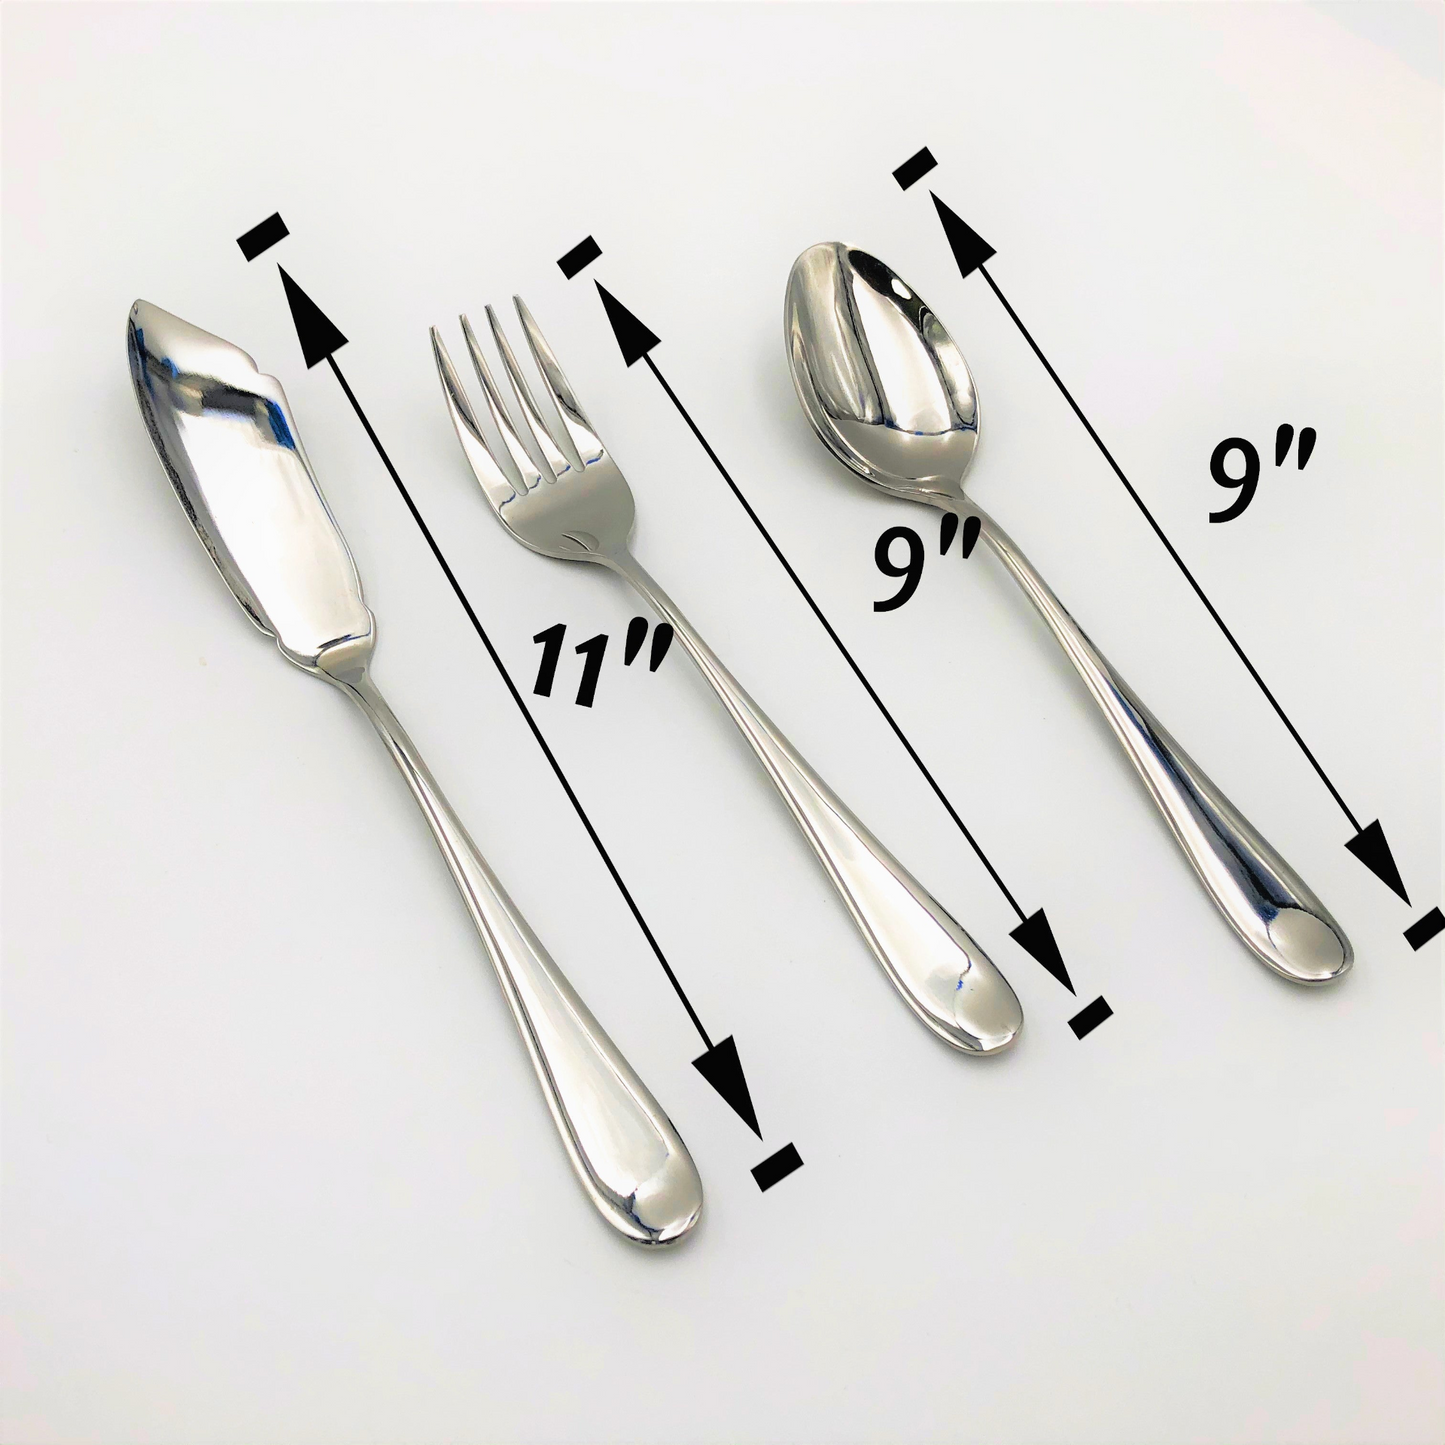 Stainless Steel Serving Fork And Knife And A Large Fish Knife Set Of 3 Pieces Great For Entertaining WL-555049